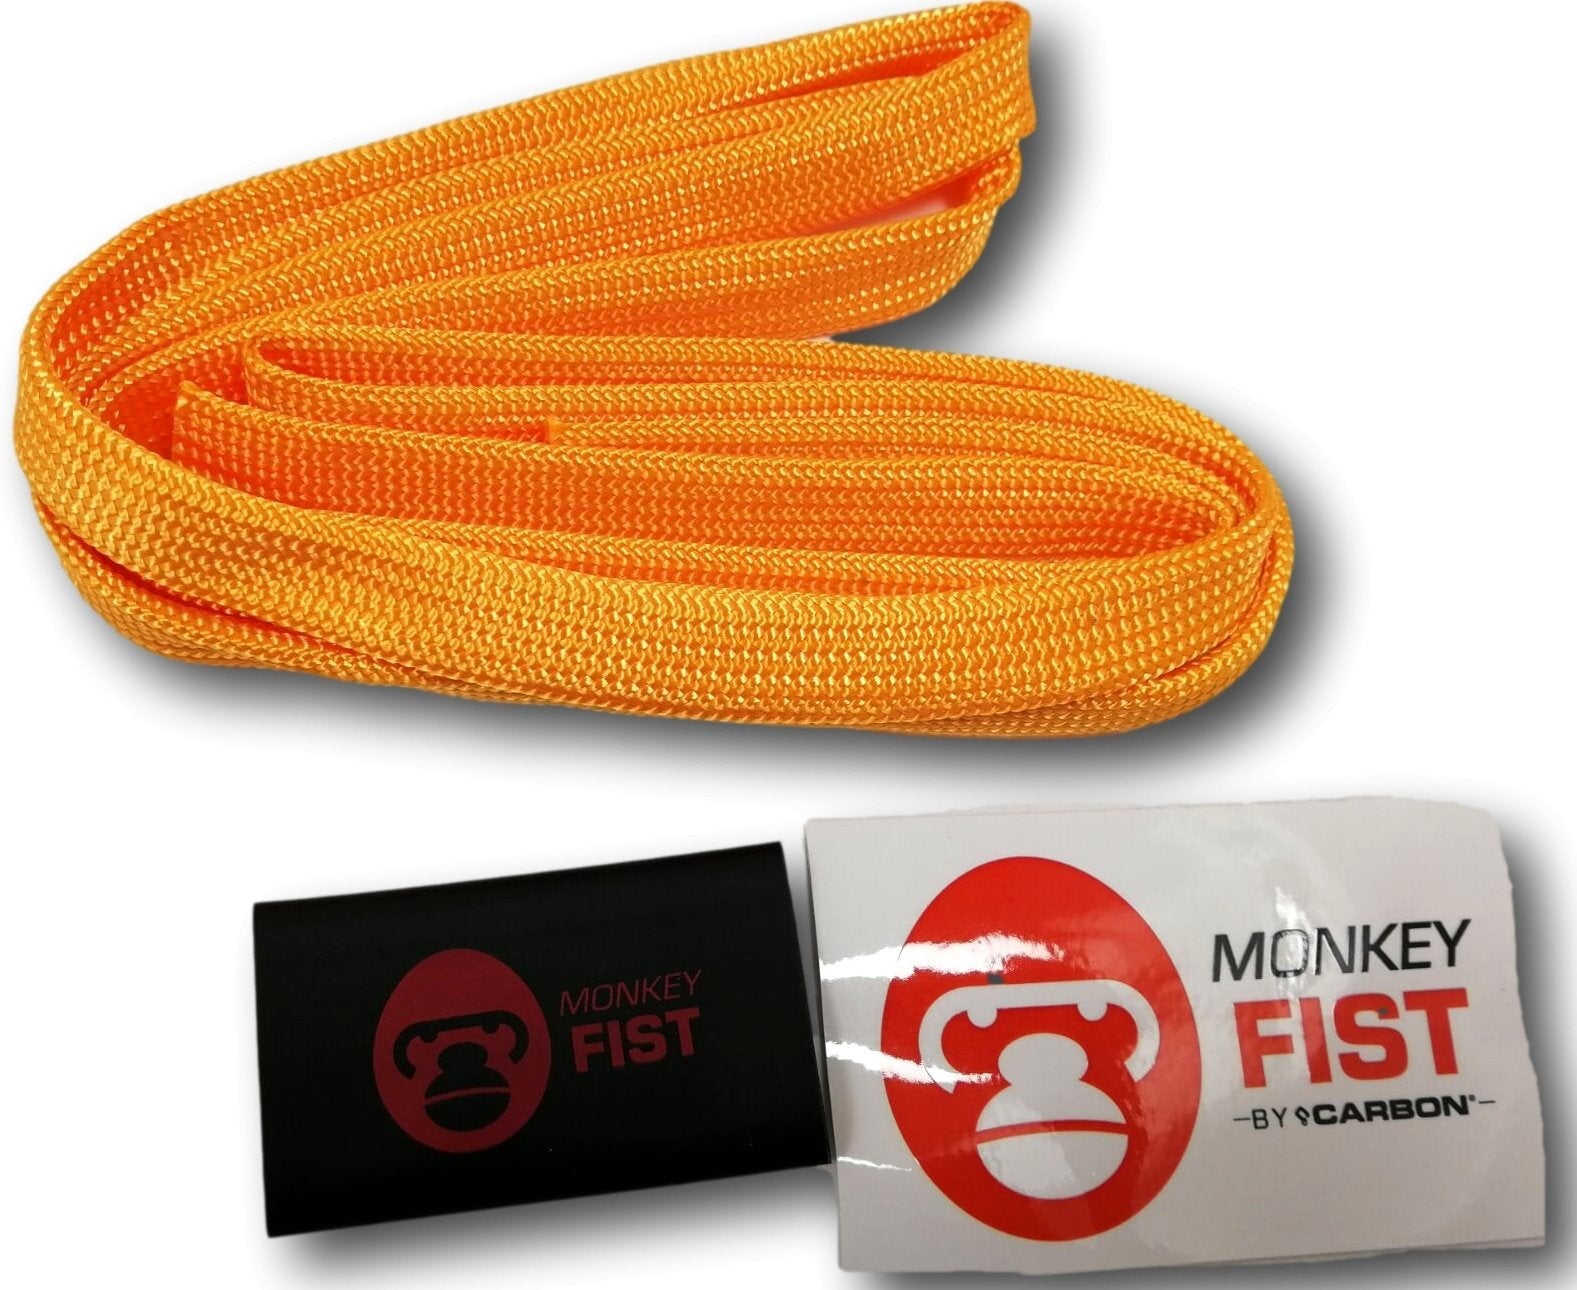 Carbon Winch Monkey Fist Coloured Rope Sheath - Carbon Offroad